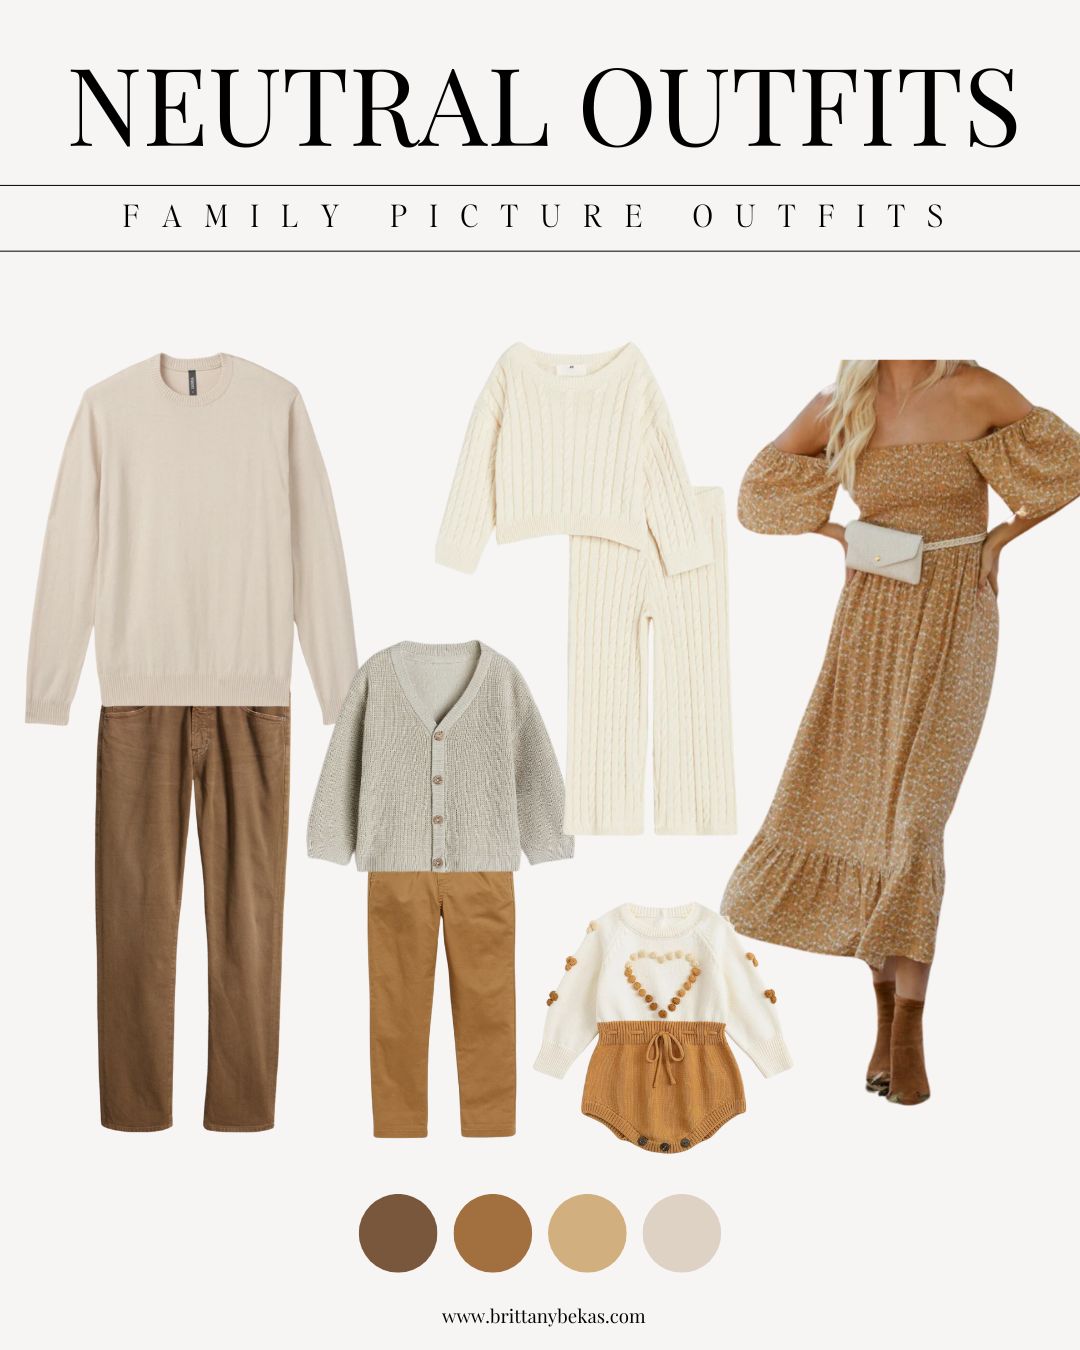 Neutral Fall Family Picture Outfits - Brittany Bekas33